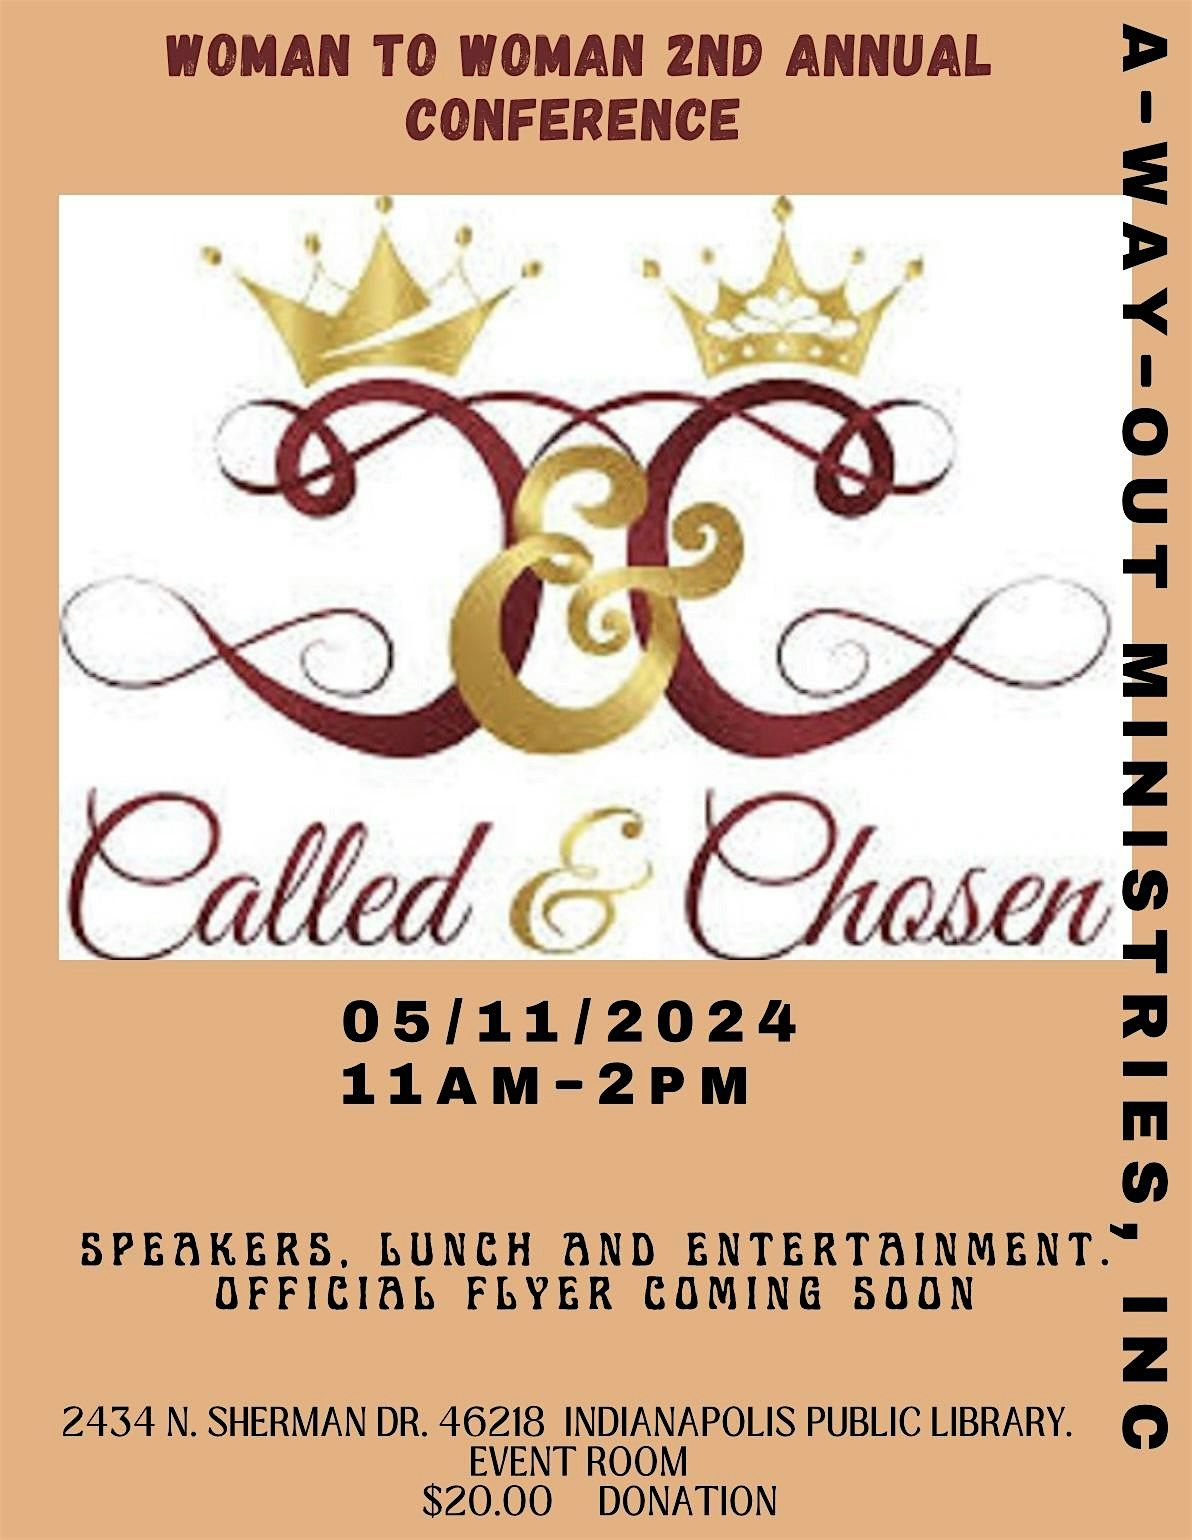 (Called & Chosen)  Woman to  Woman 2nd Annual  Conference